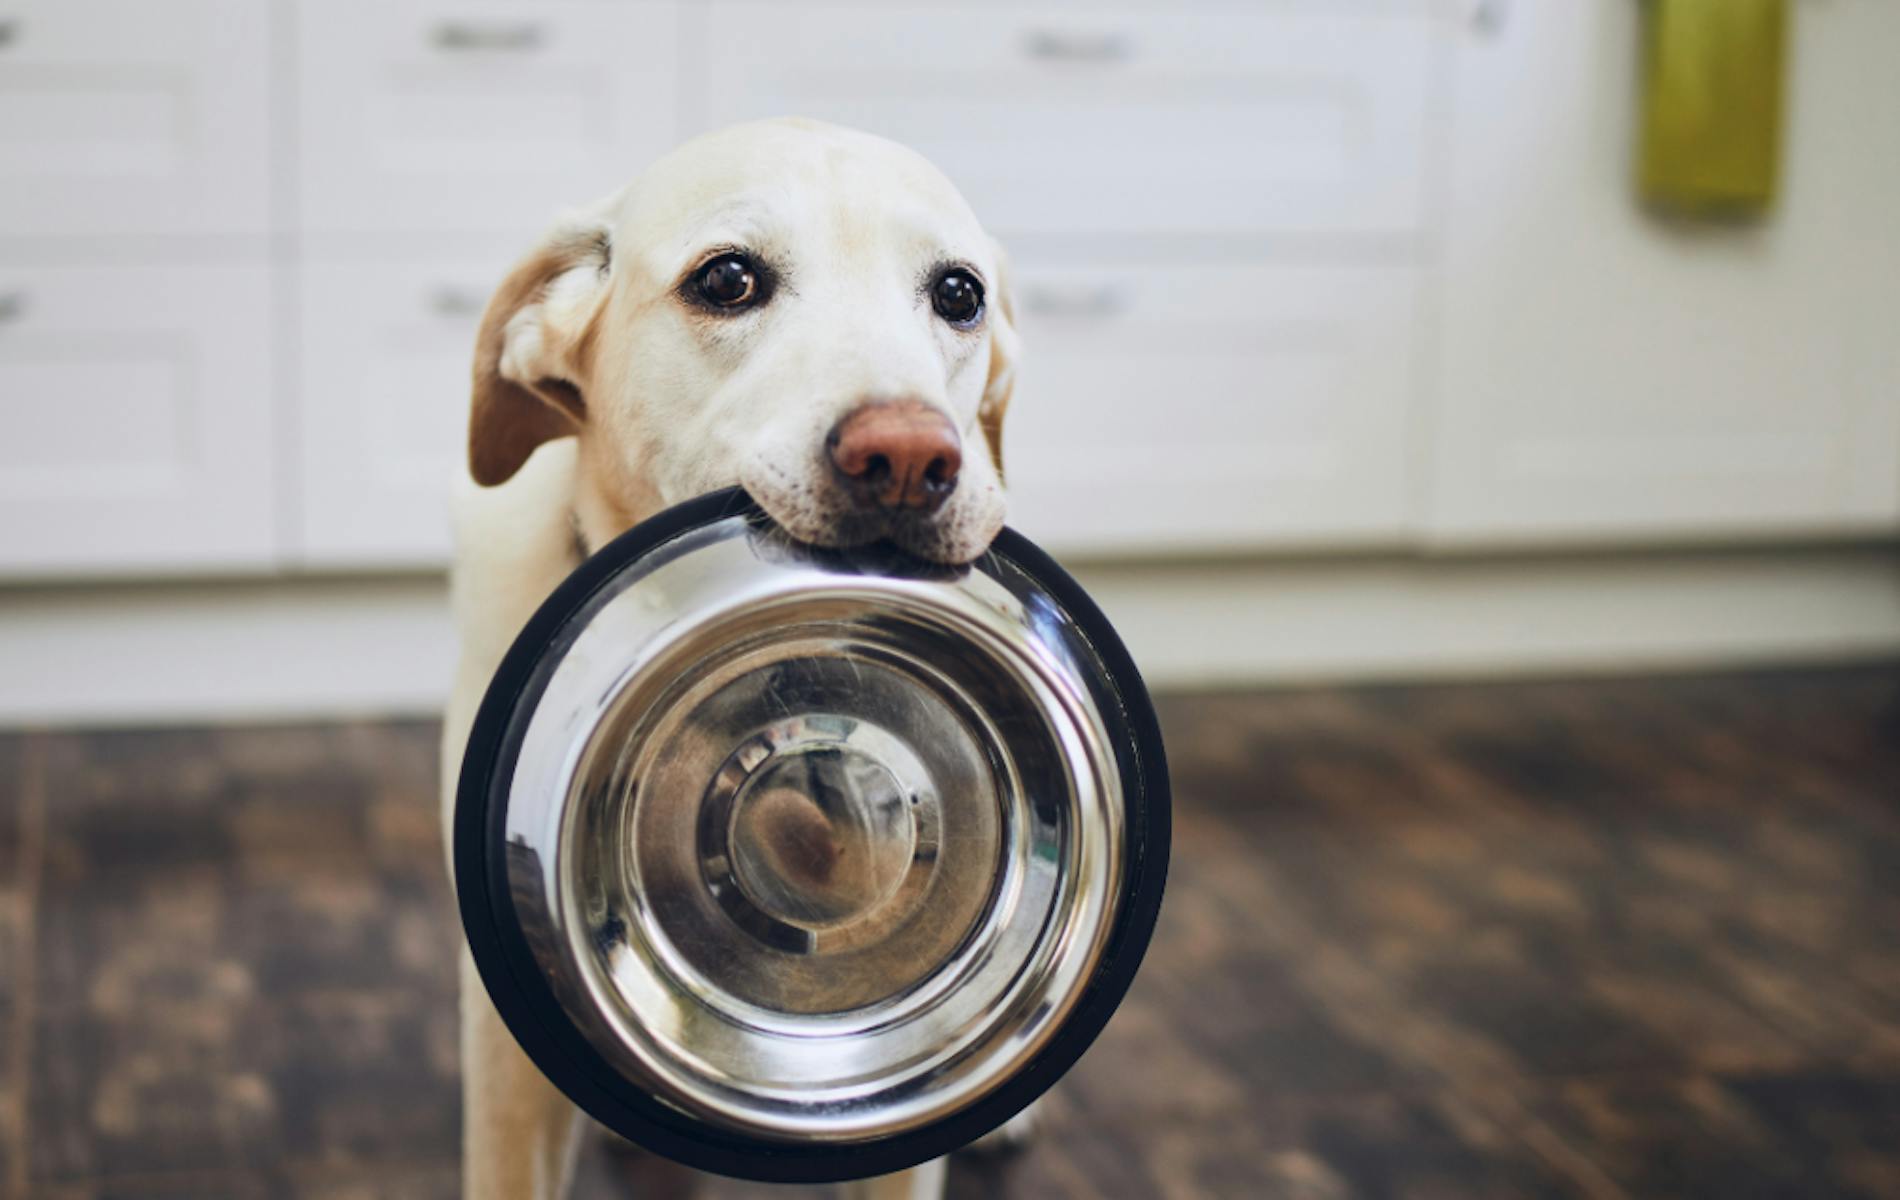 Dog with food bowl in its mouth